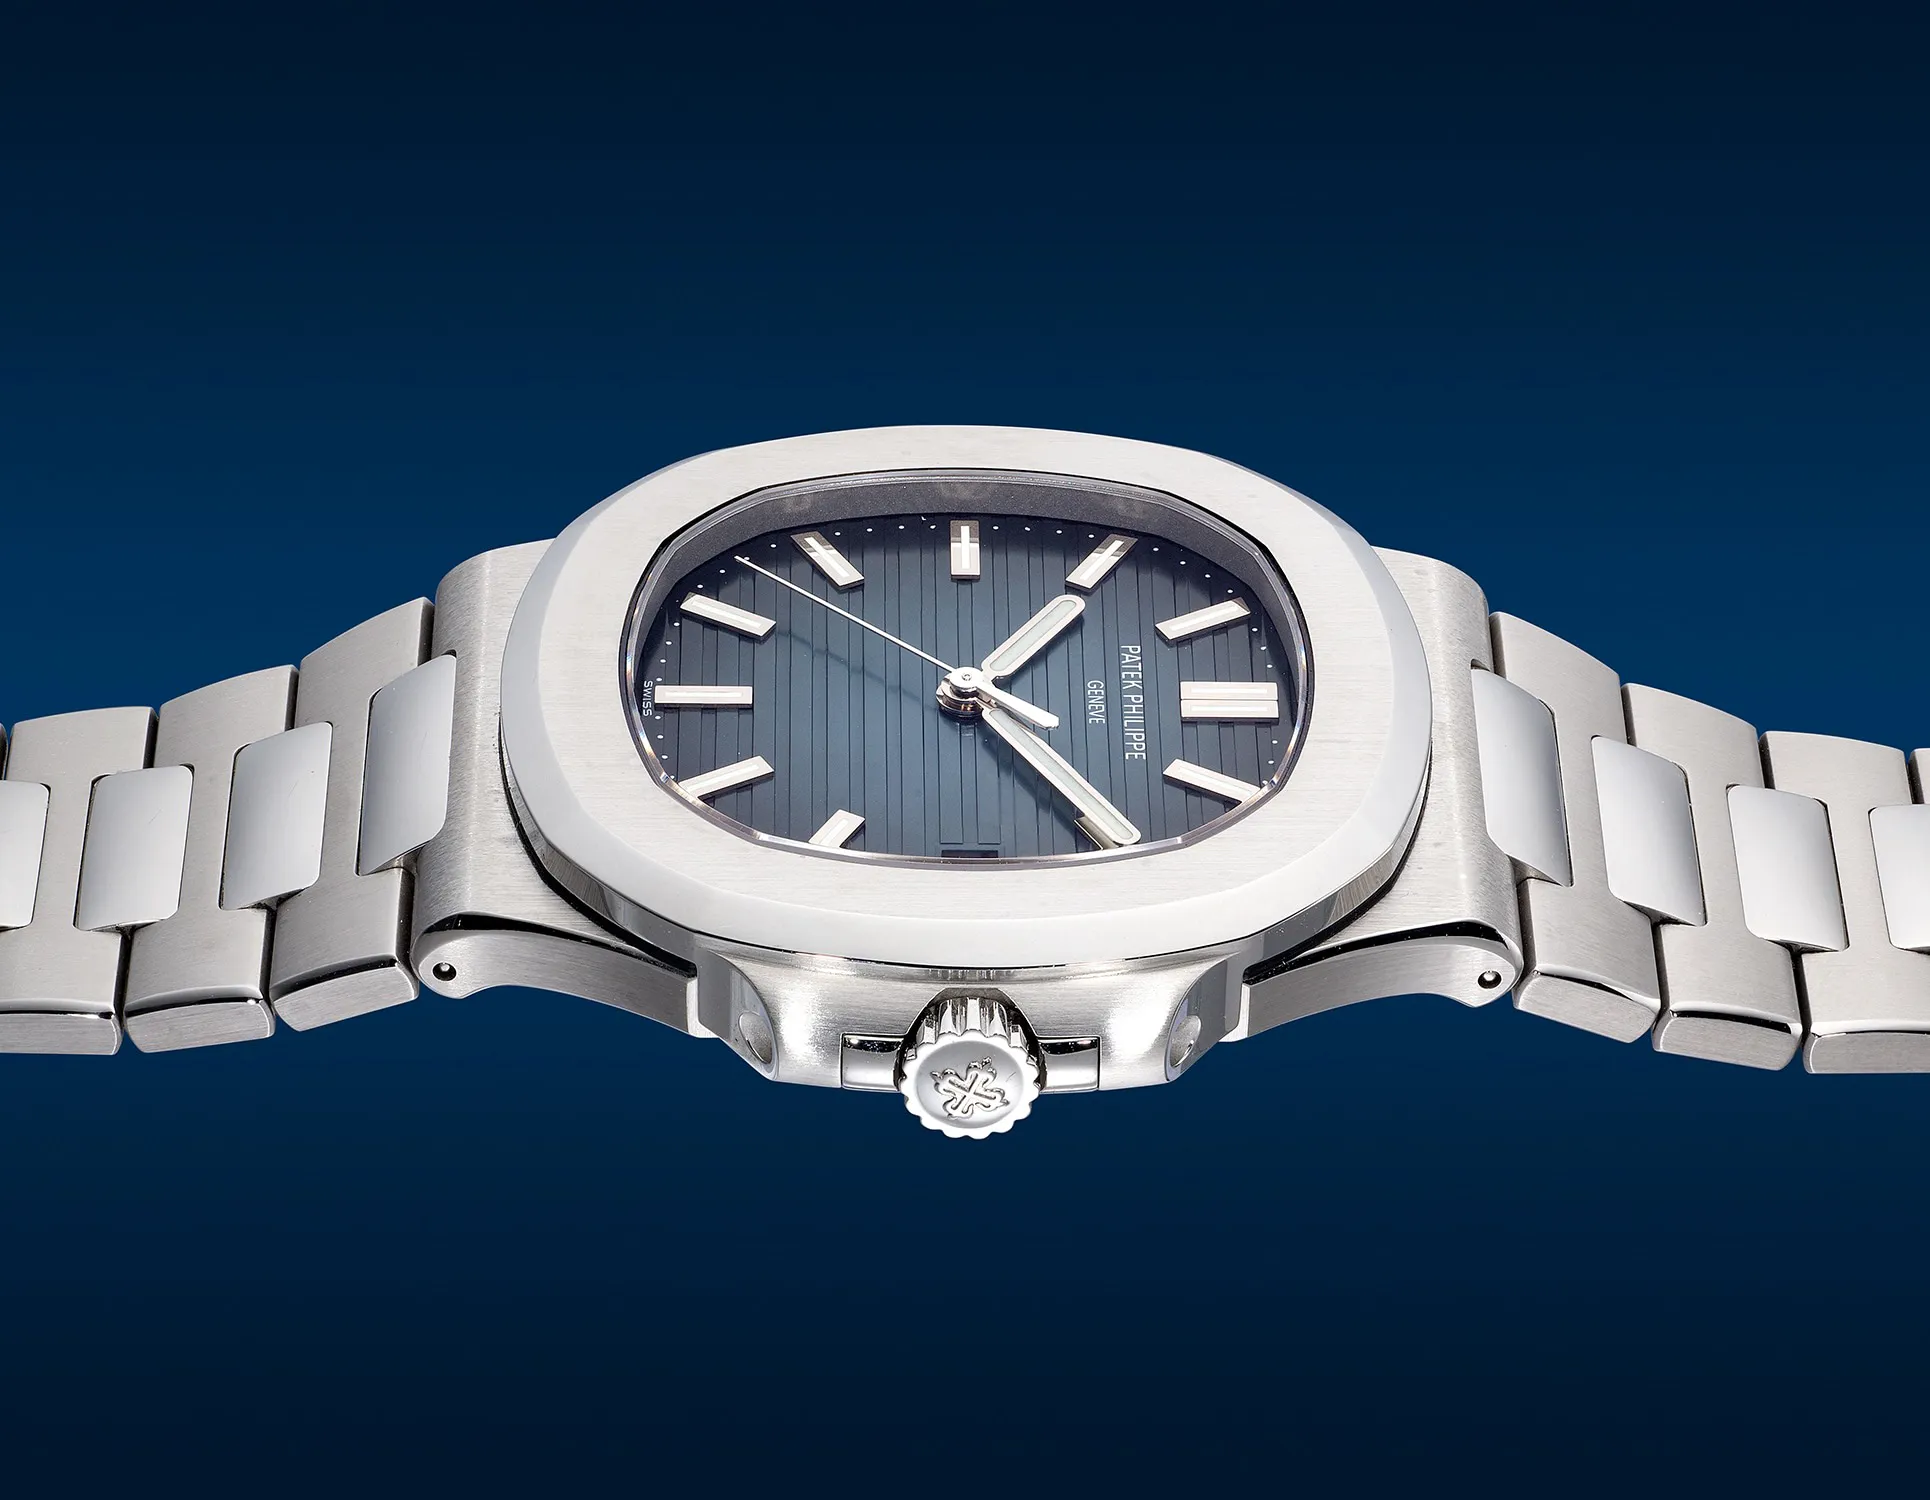 Patek Philippe Nautilus 5711/1A-010 40mm Stainless steel Blue 2